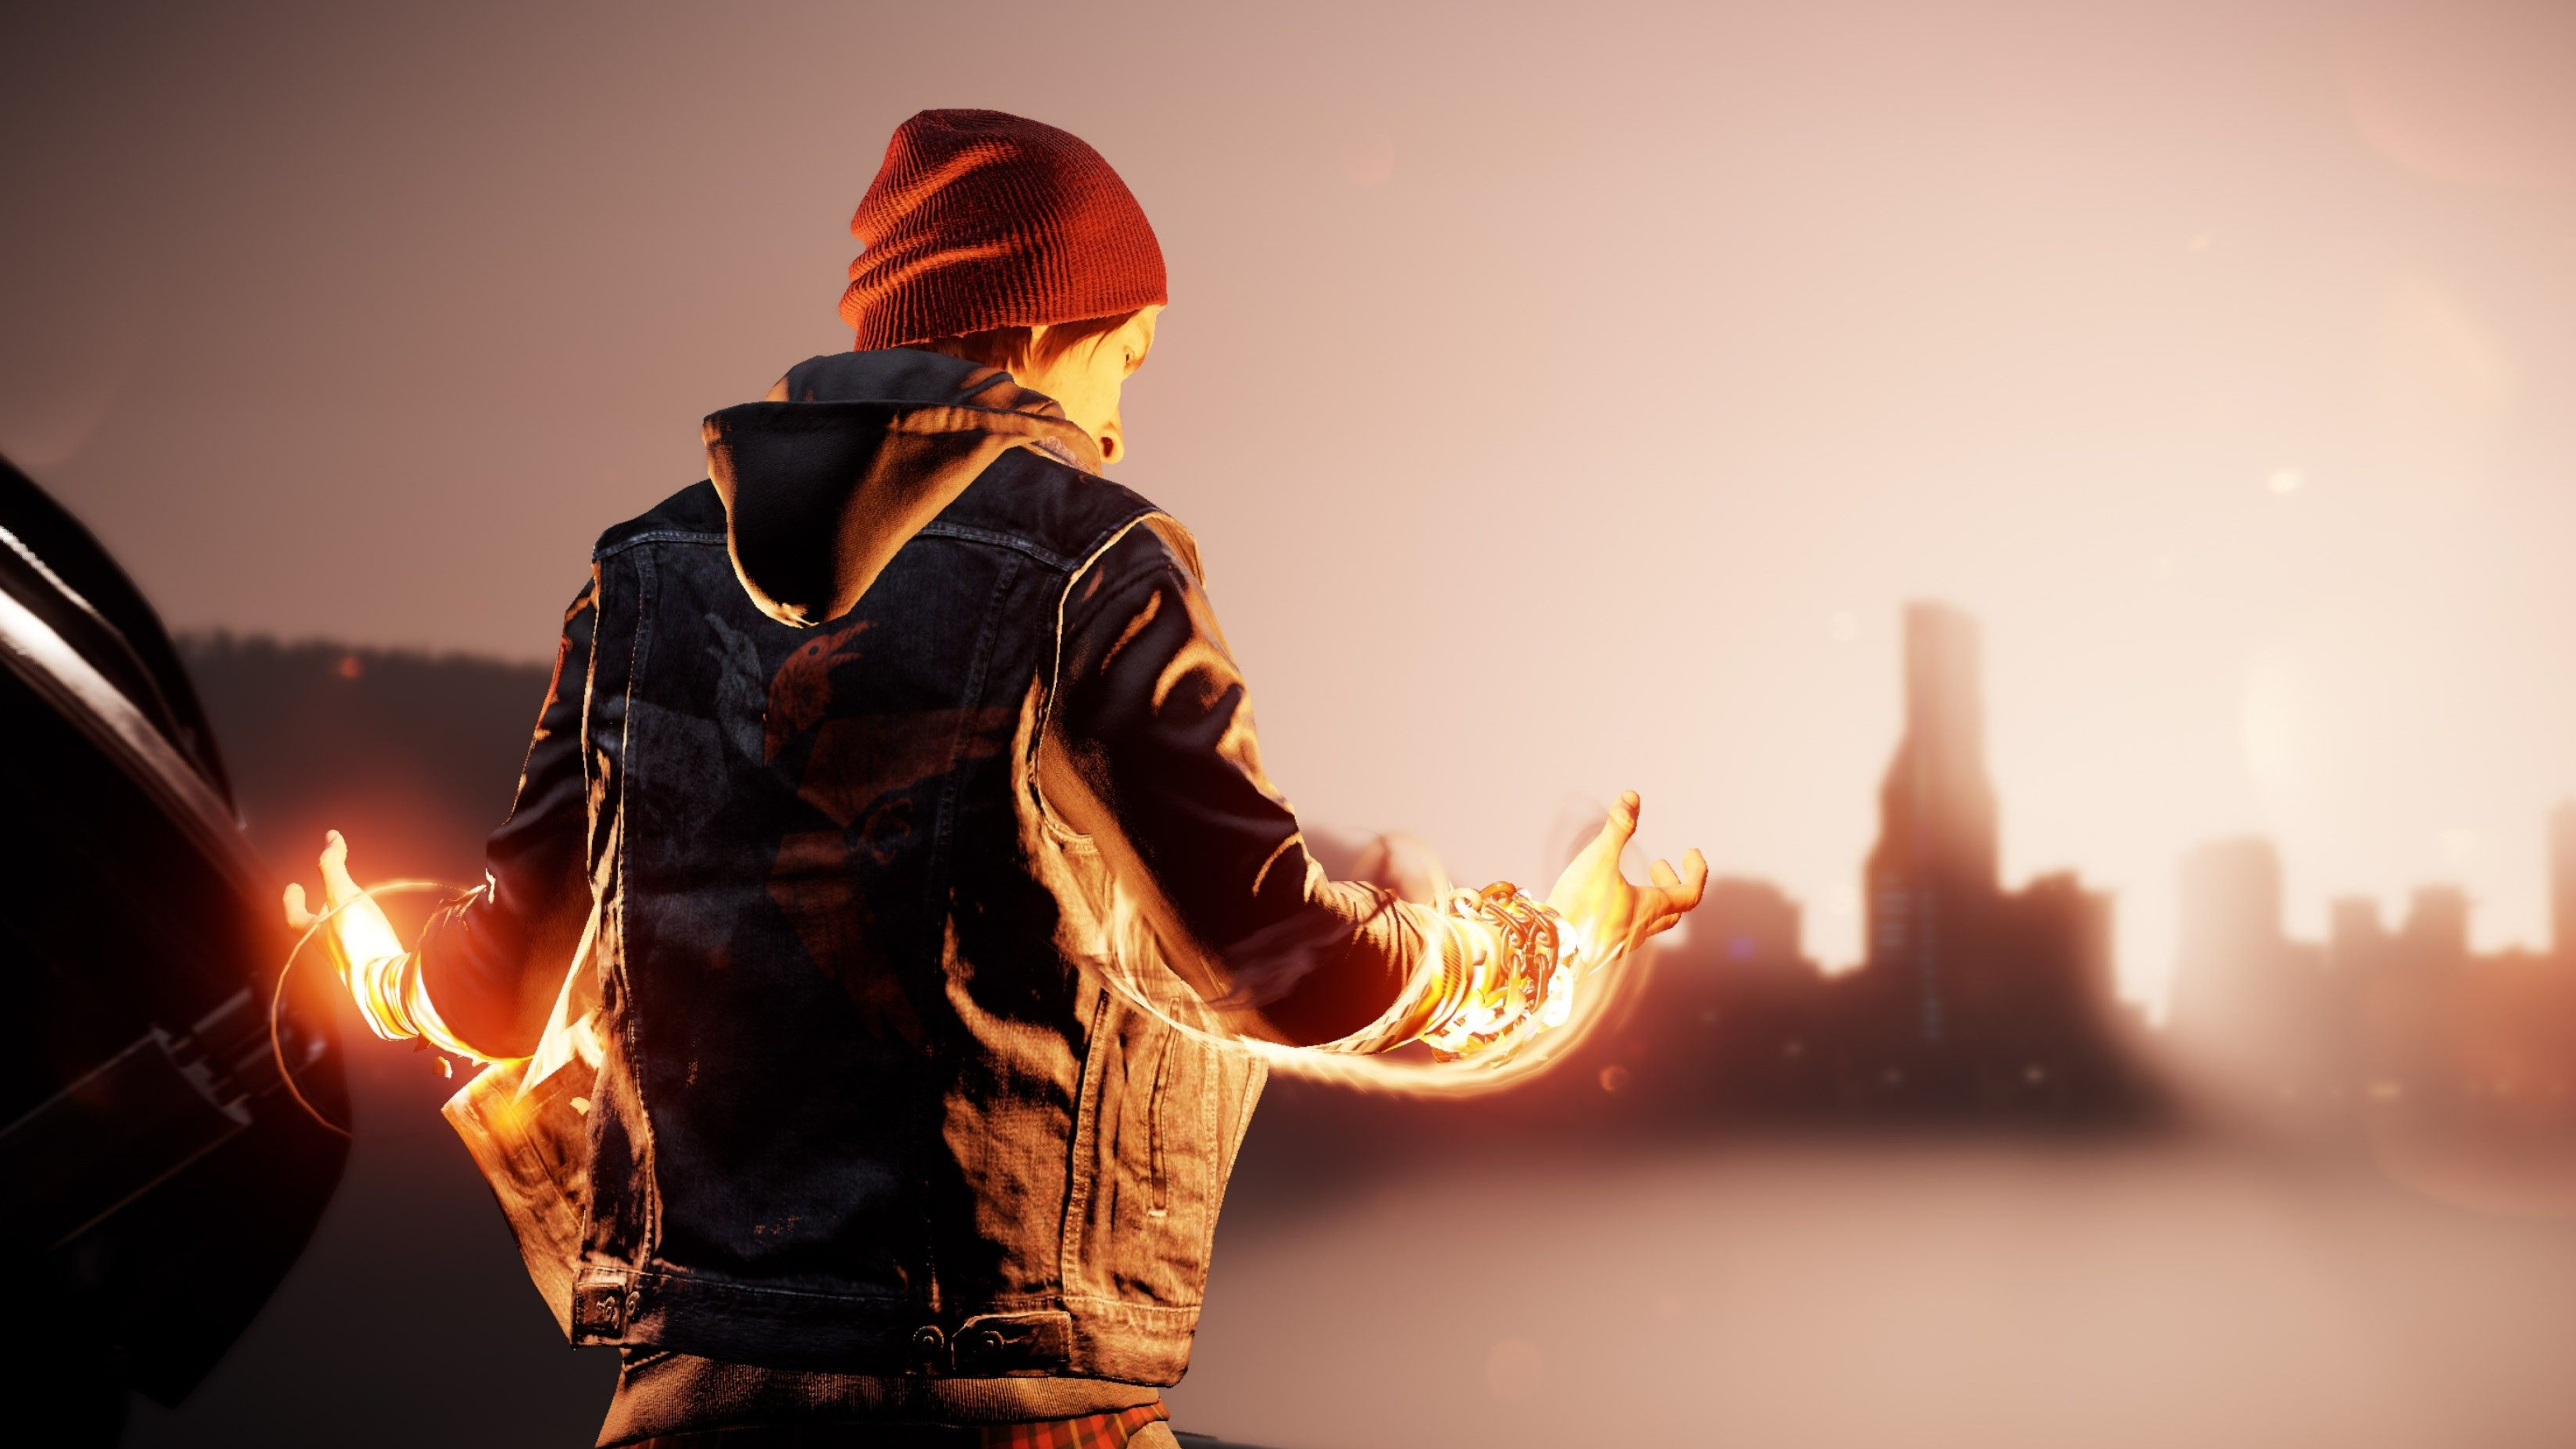 inFAMOUS: Second Son, Striking wallpapers, Captivating backgrounds, Gaming aesthetics, 3670x2070 HD Desktop